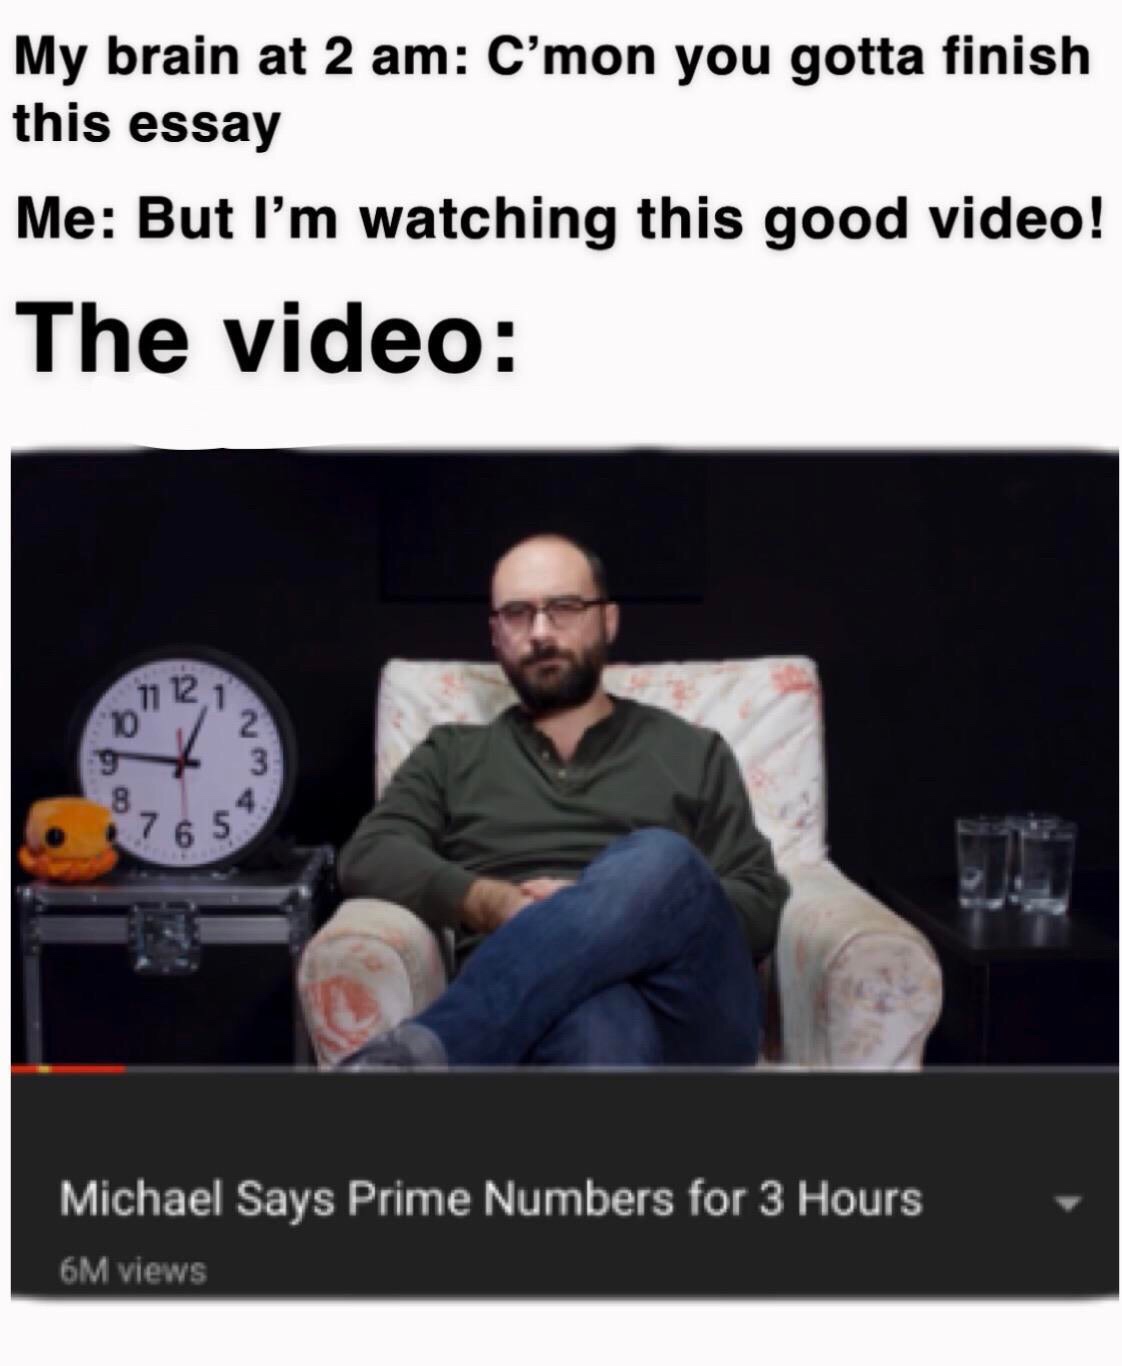 vsauce memes - My brain at 2 am C'mon you gotta finish this essay Me But I'm watching this good video! The video Michael Says Prime Numbers for 3 Hours 6M views